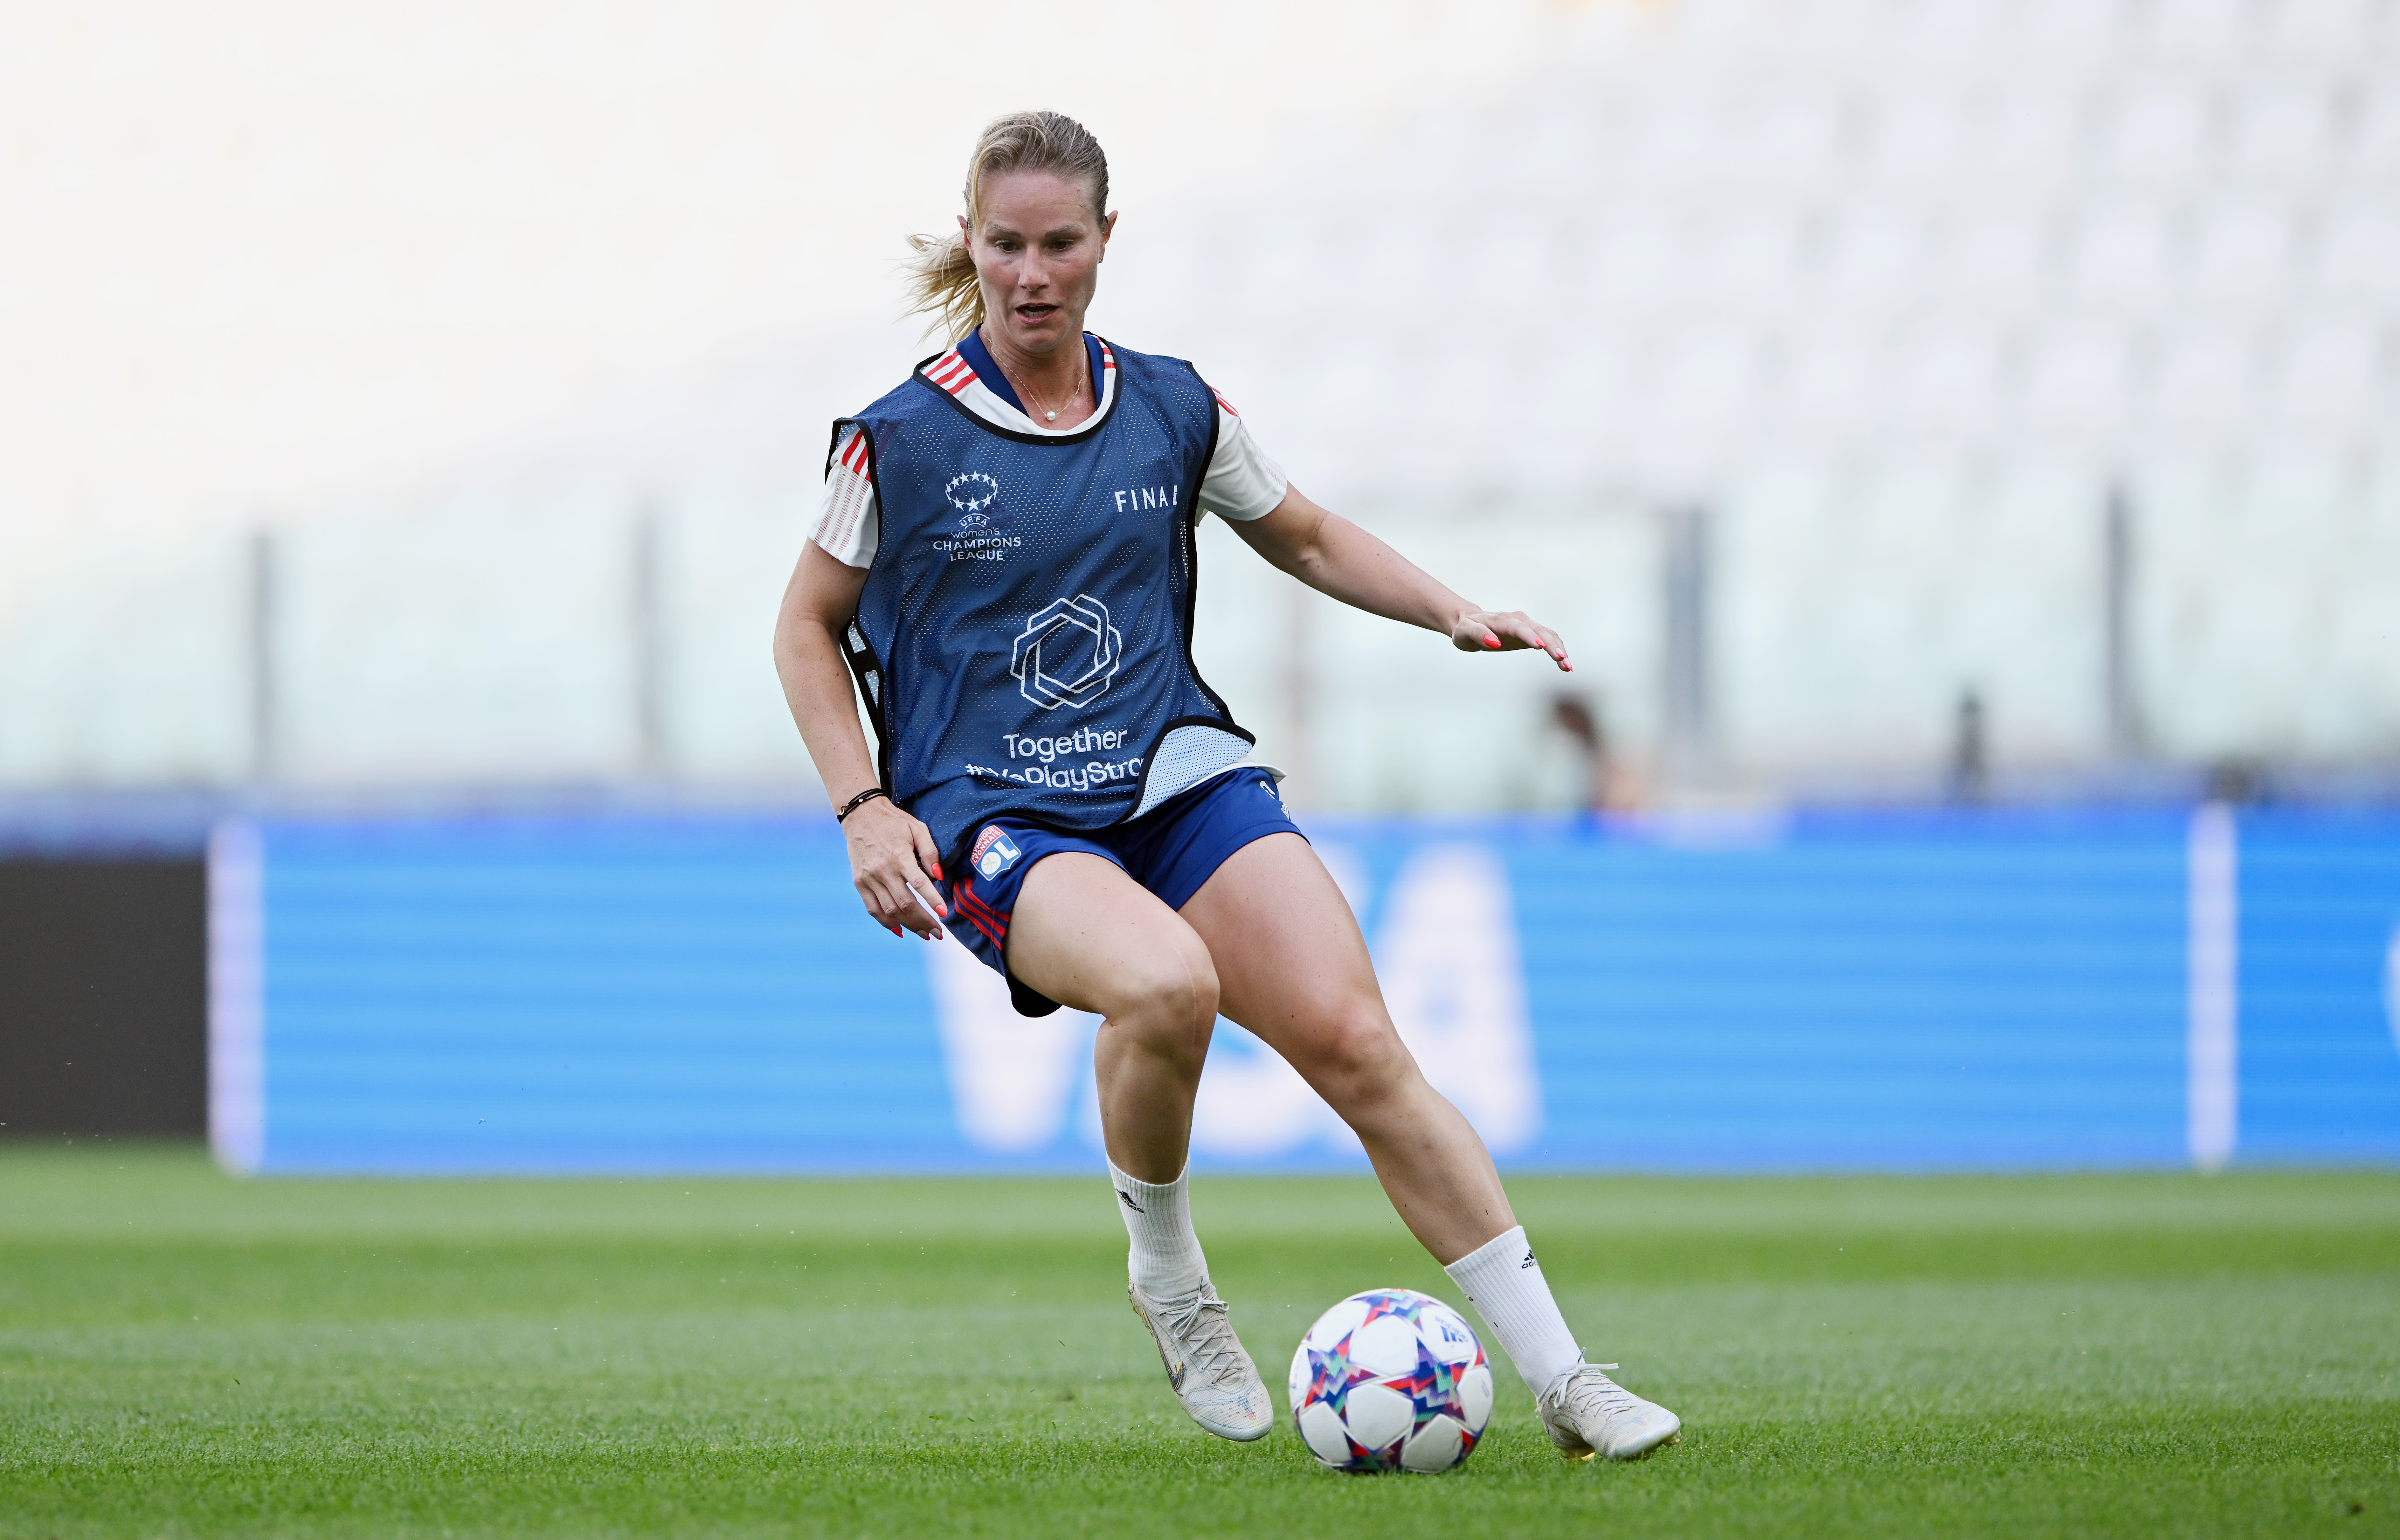 Olympique Lyonnais Training Session And Press Conference - UEFA Women's Champions League Final 2021/22